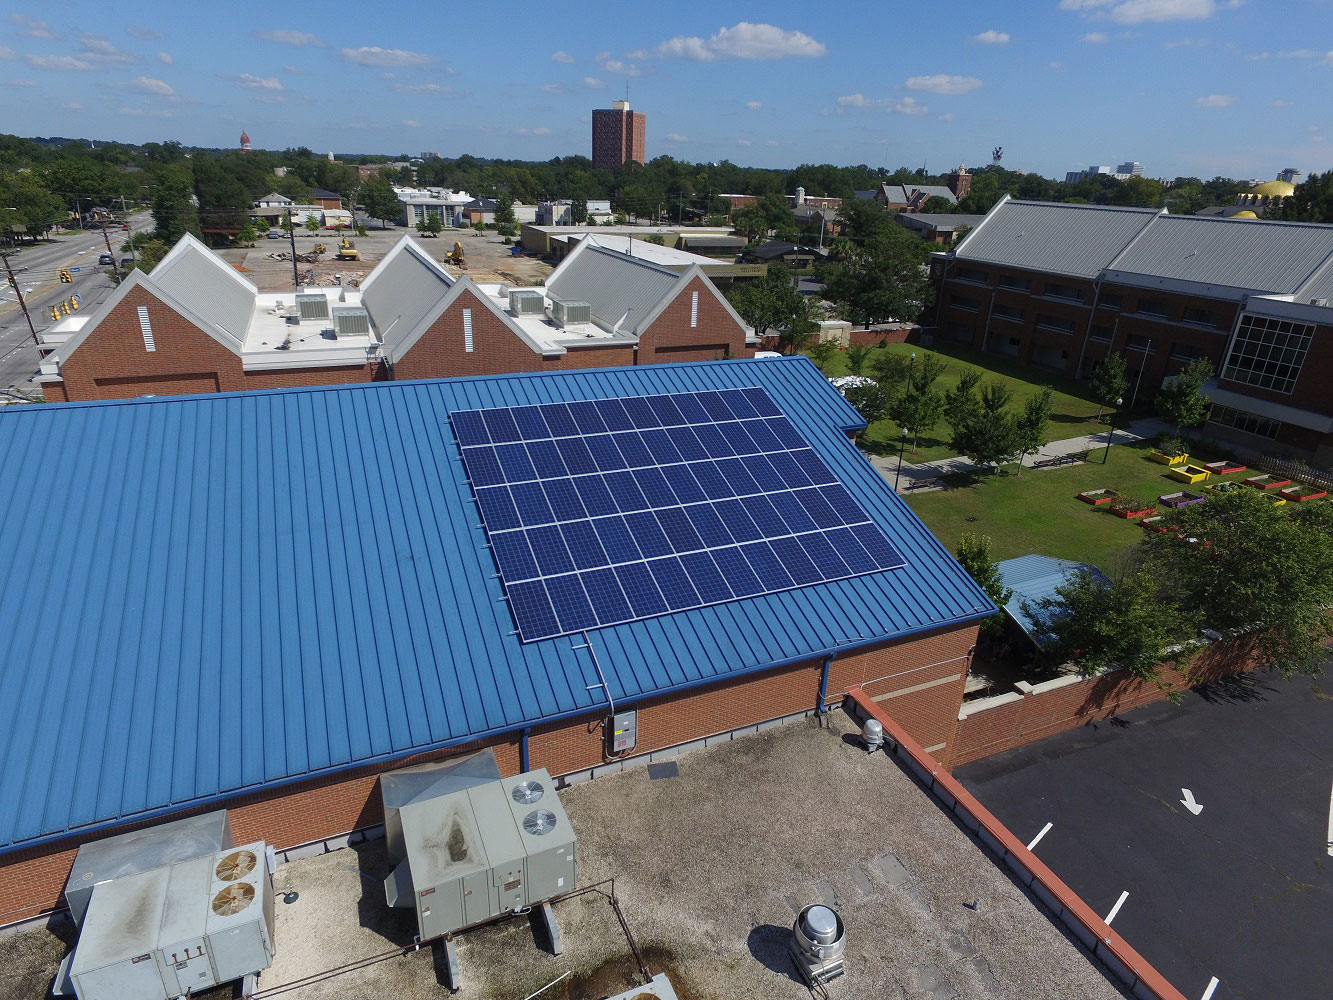 Picture of a Business with Solar Panels on the Roof